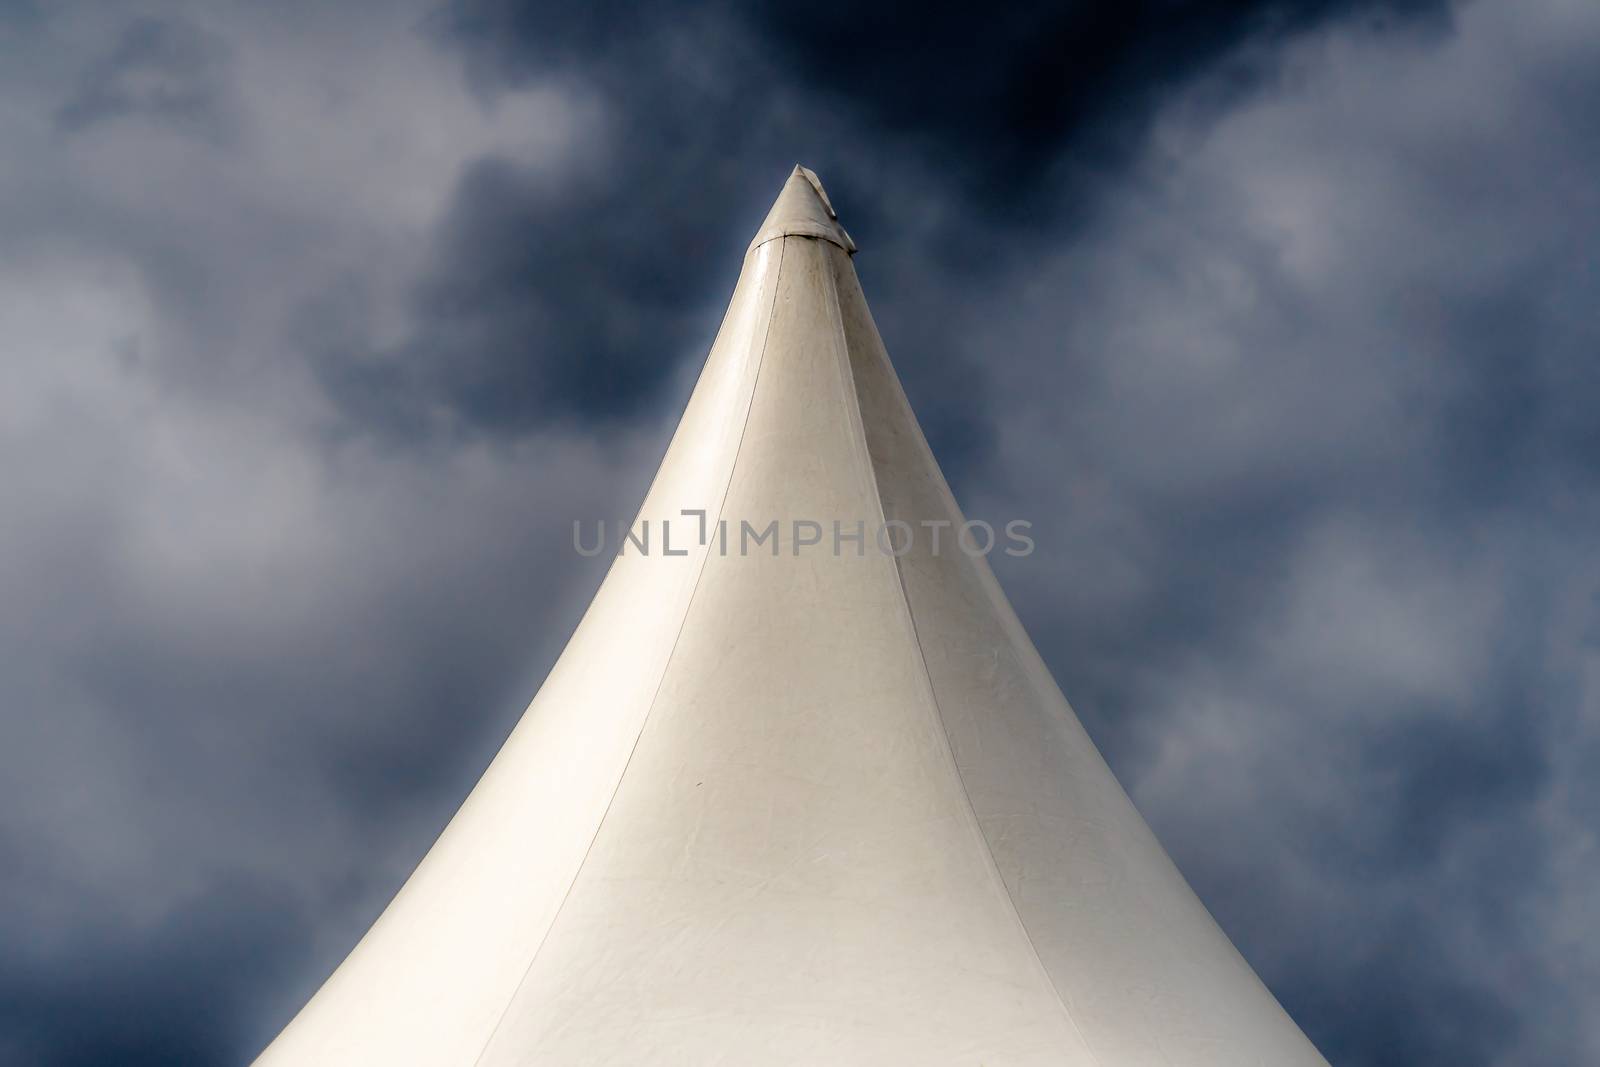 Abstract artistic shot from the top of a white tent in front of a threatening dramatic grey sky with clouds by geogif